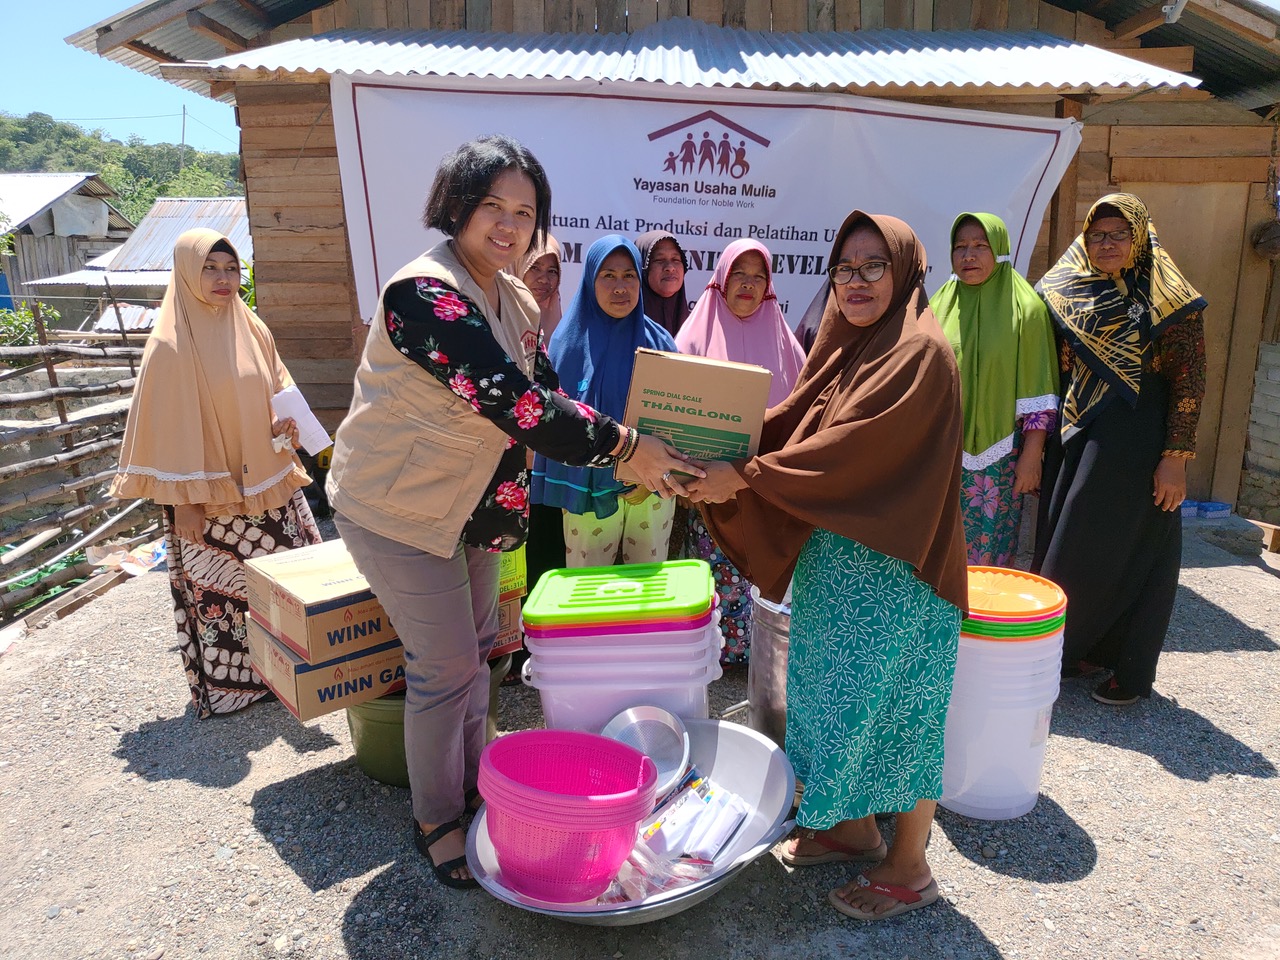 YUM was given the opportunity to help activate the local economy that had temporarily stopped due to the disasters by empowering groups of women, most of them housewives, from five villages in Palu, Donggala and Sigi.